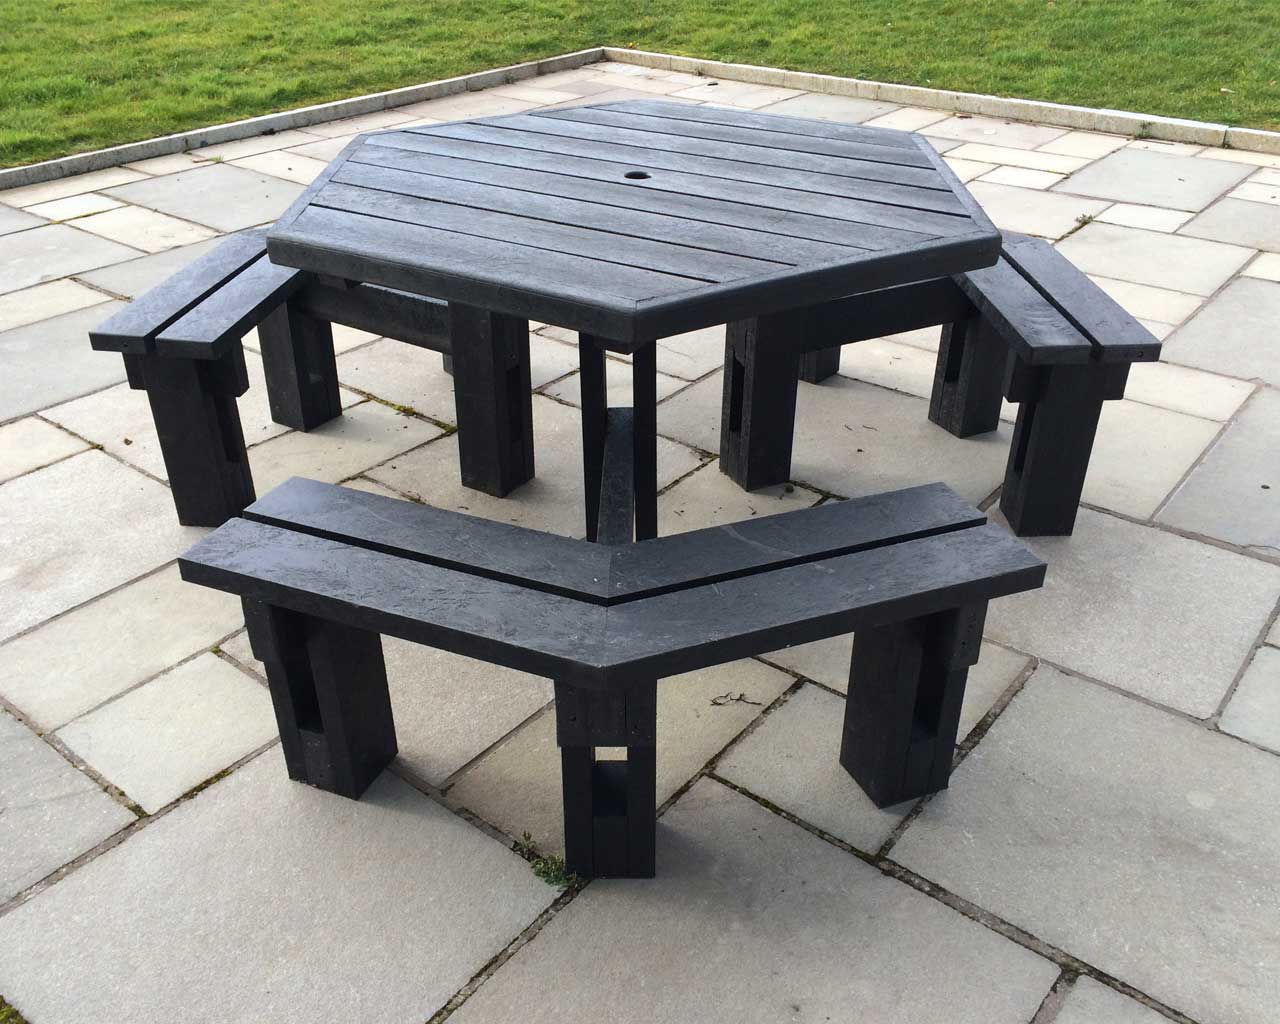 6 sided picnic table without back